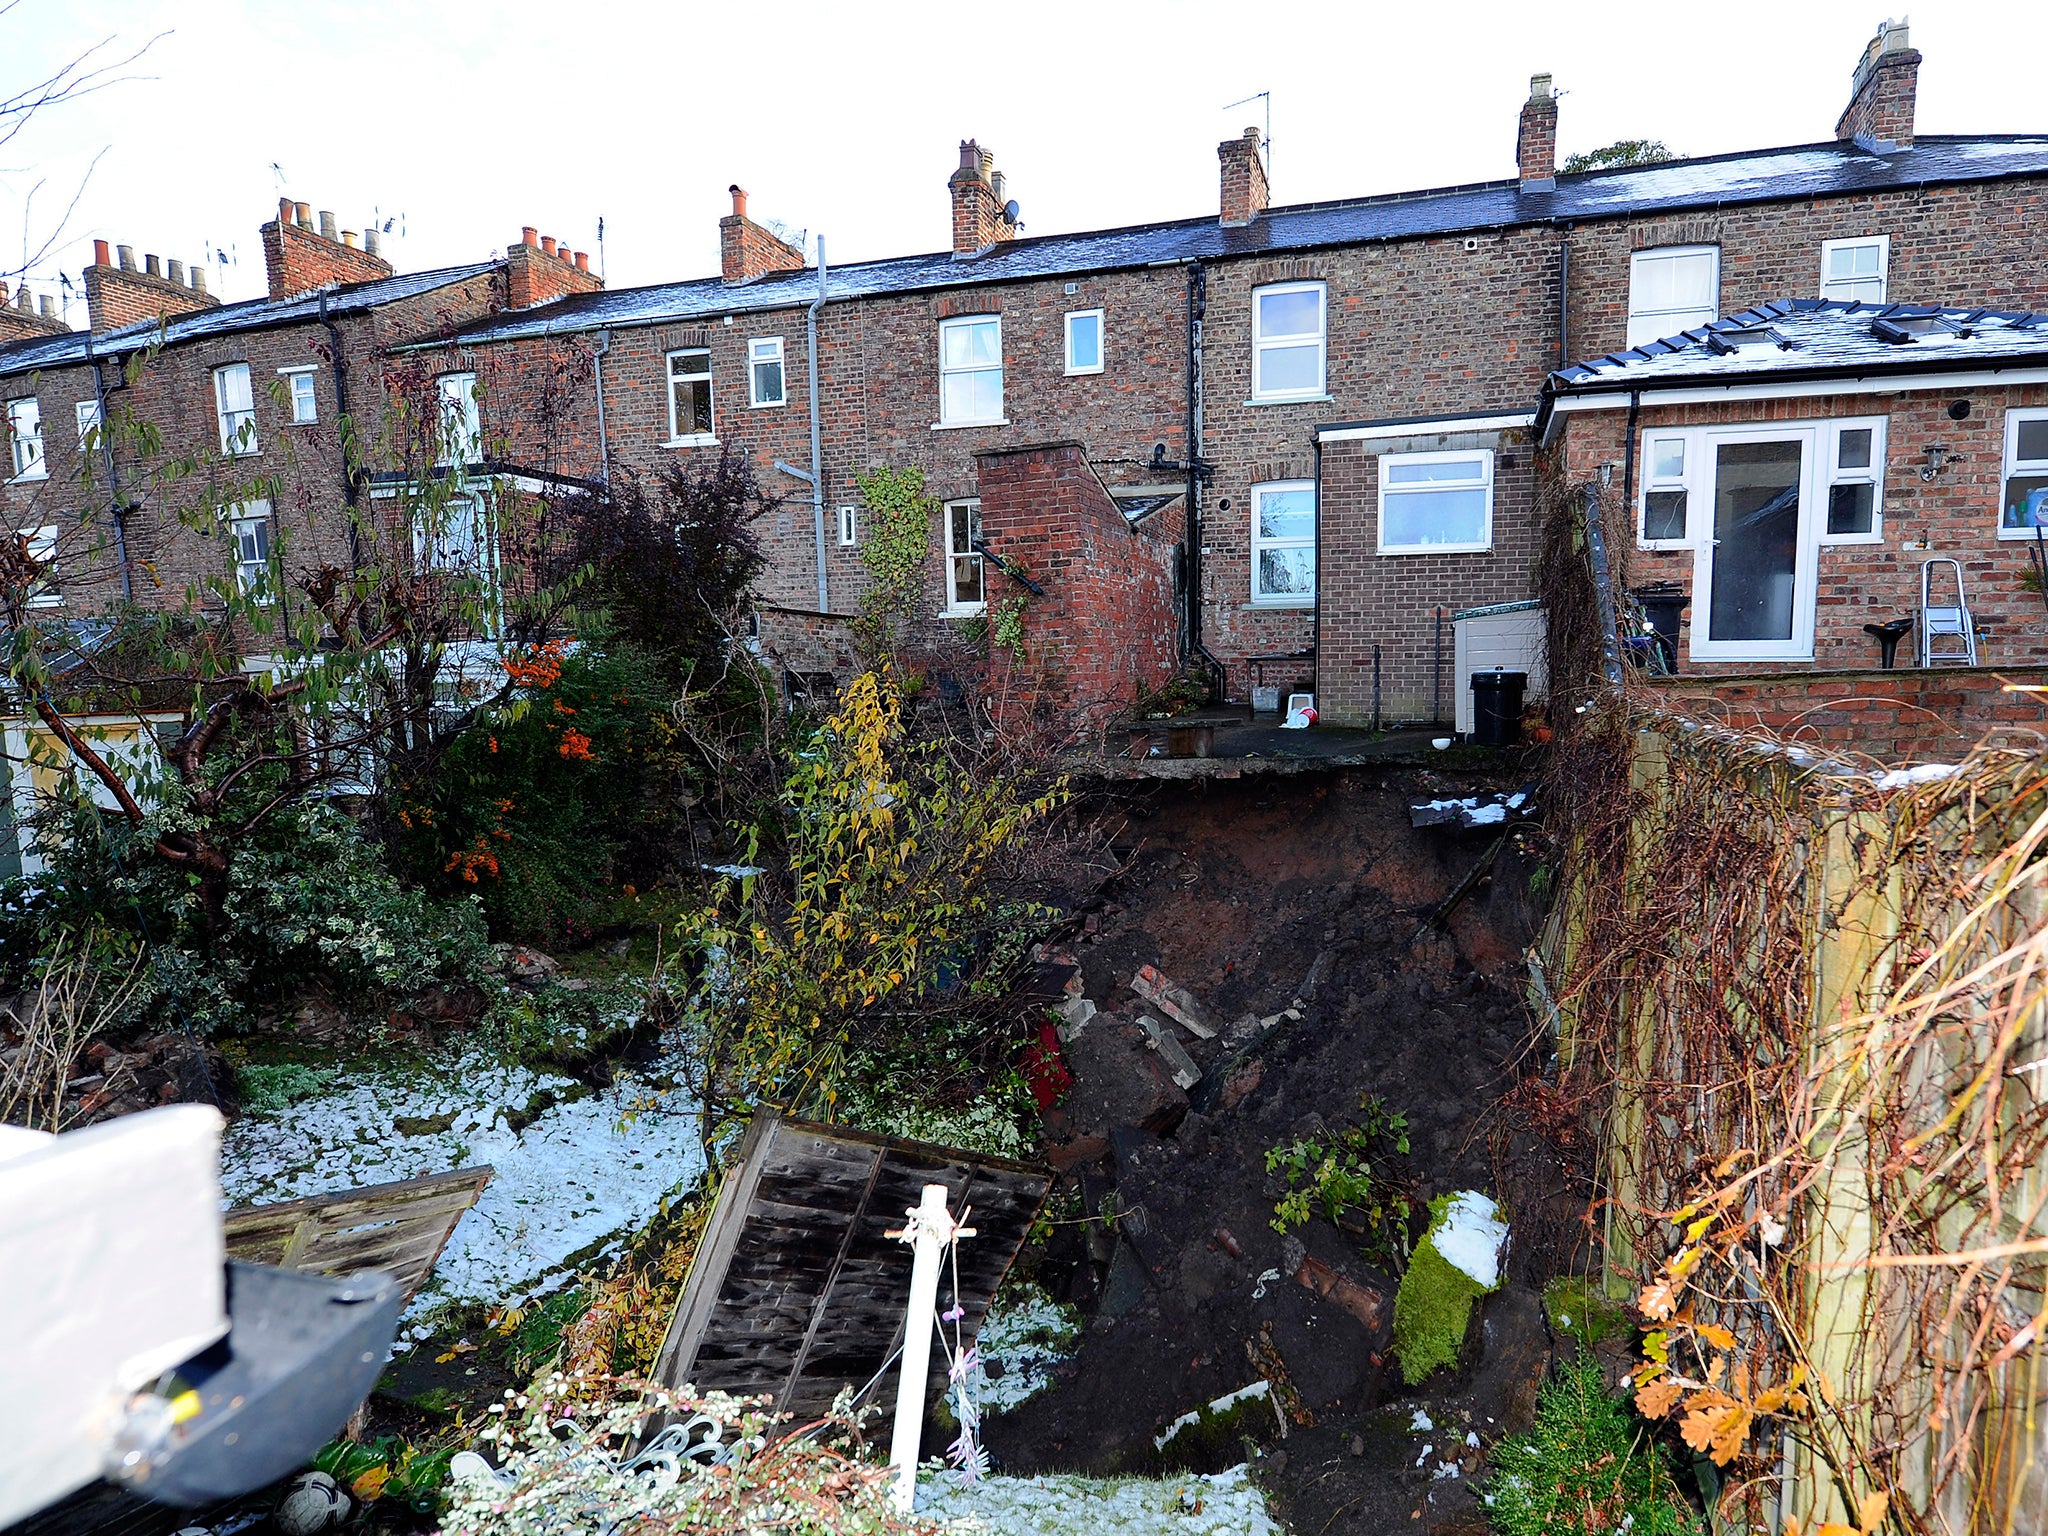 The sink hole "with an unknown depth" which appeared in gardens in Ripon, North Yorkshire